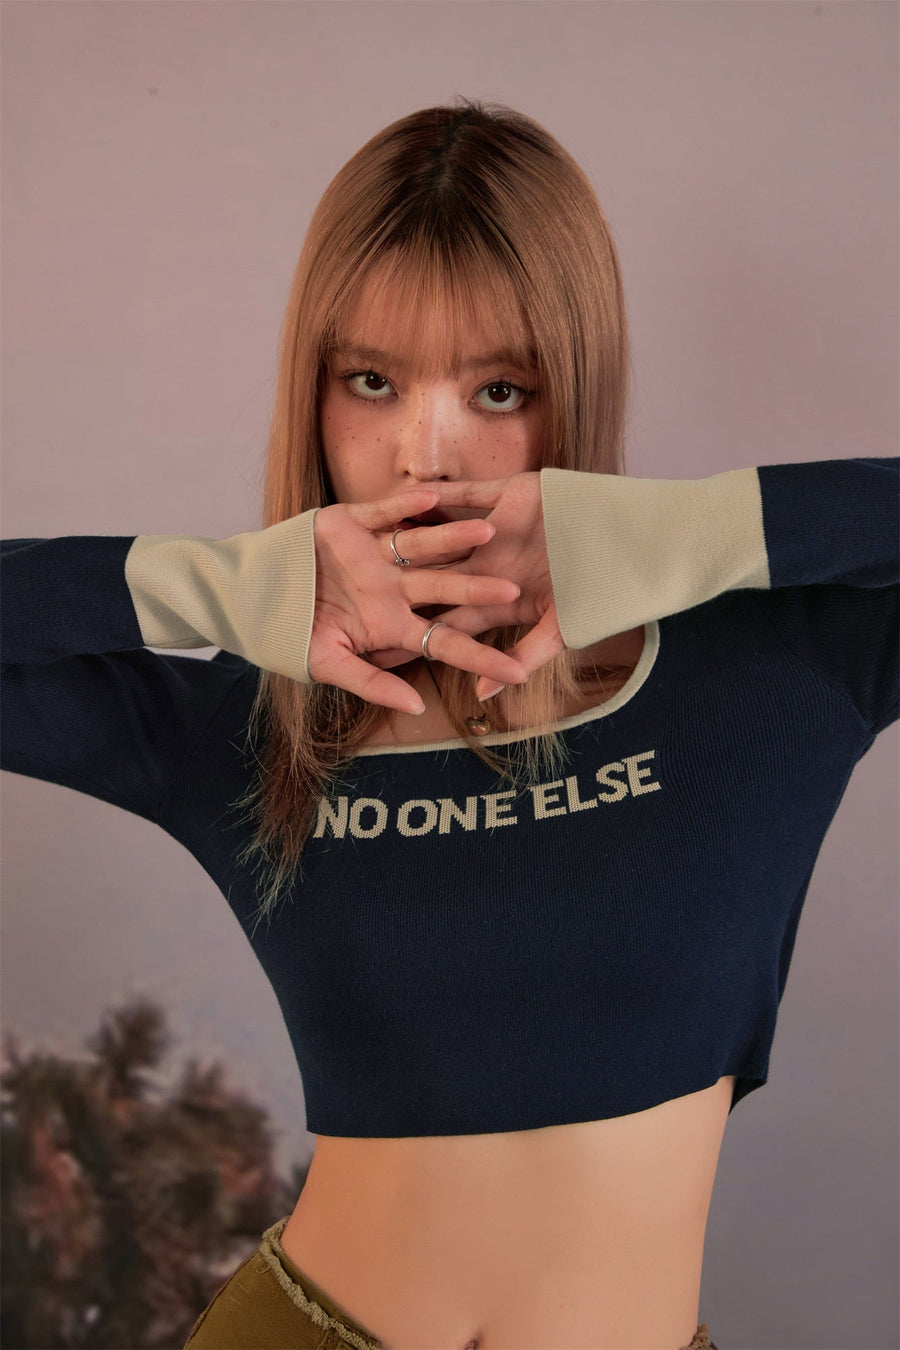 CHUU Round Neck Lettering Long Sleeve Crop Knit Top